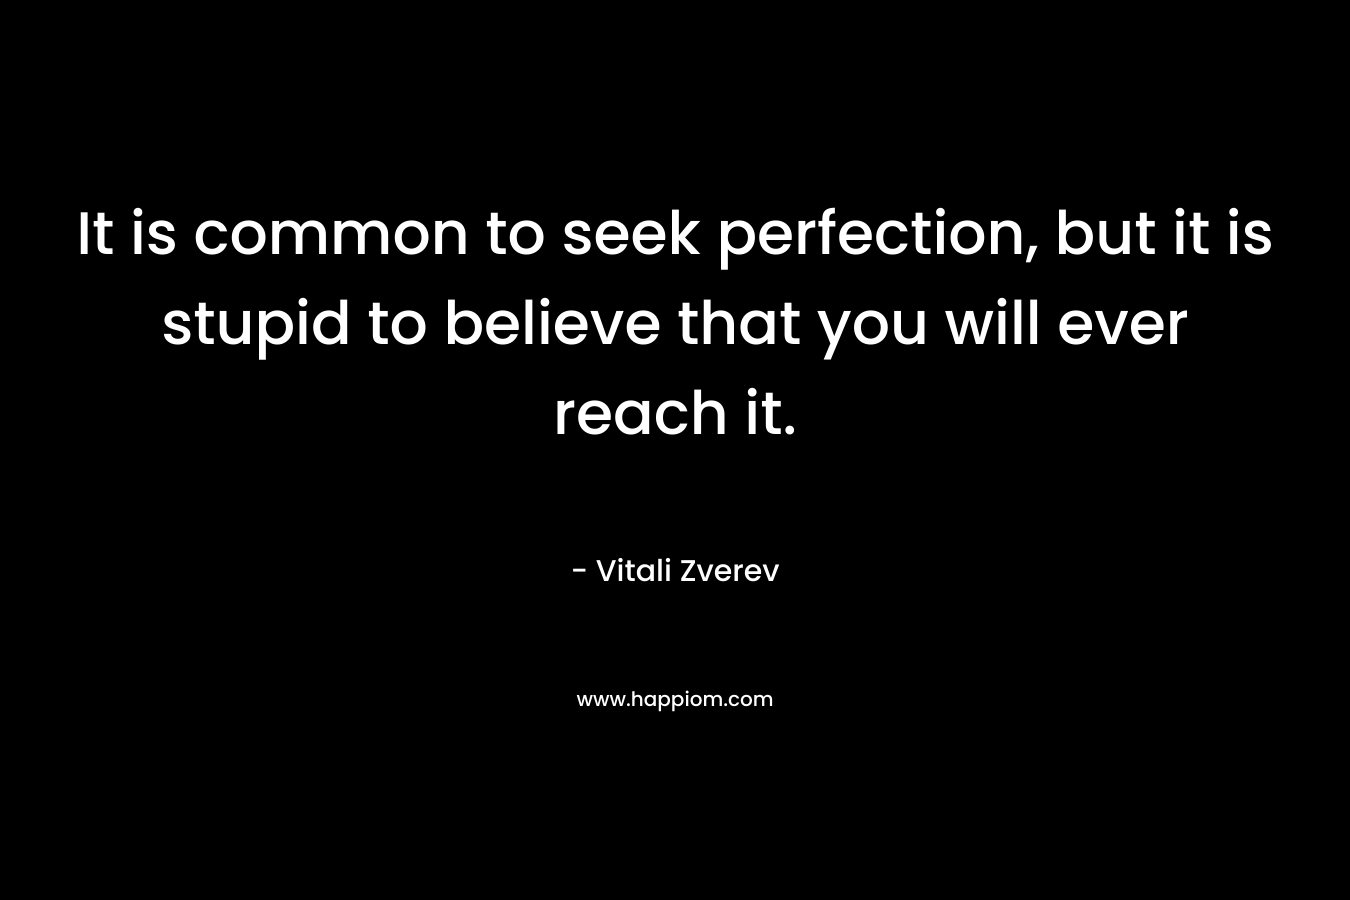 It is common to seek perfection, but it is stupid to believe that you will ever reach it.